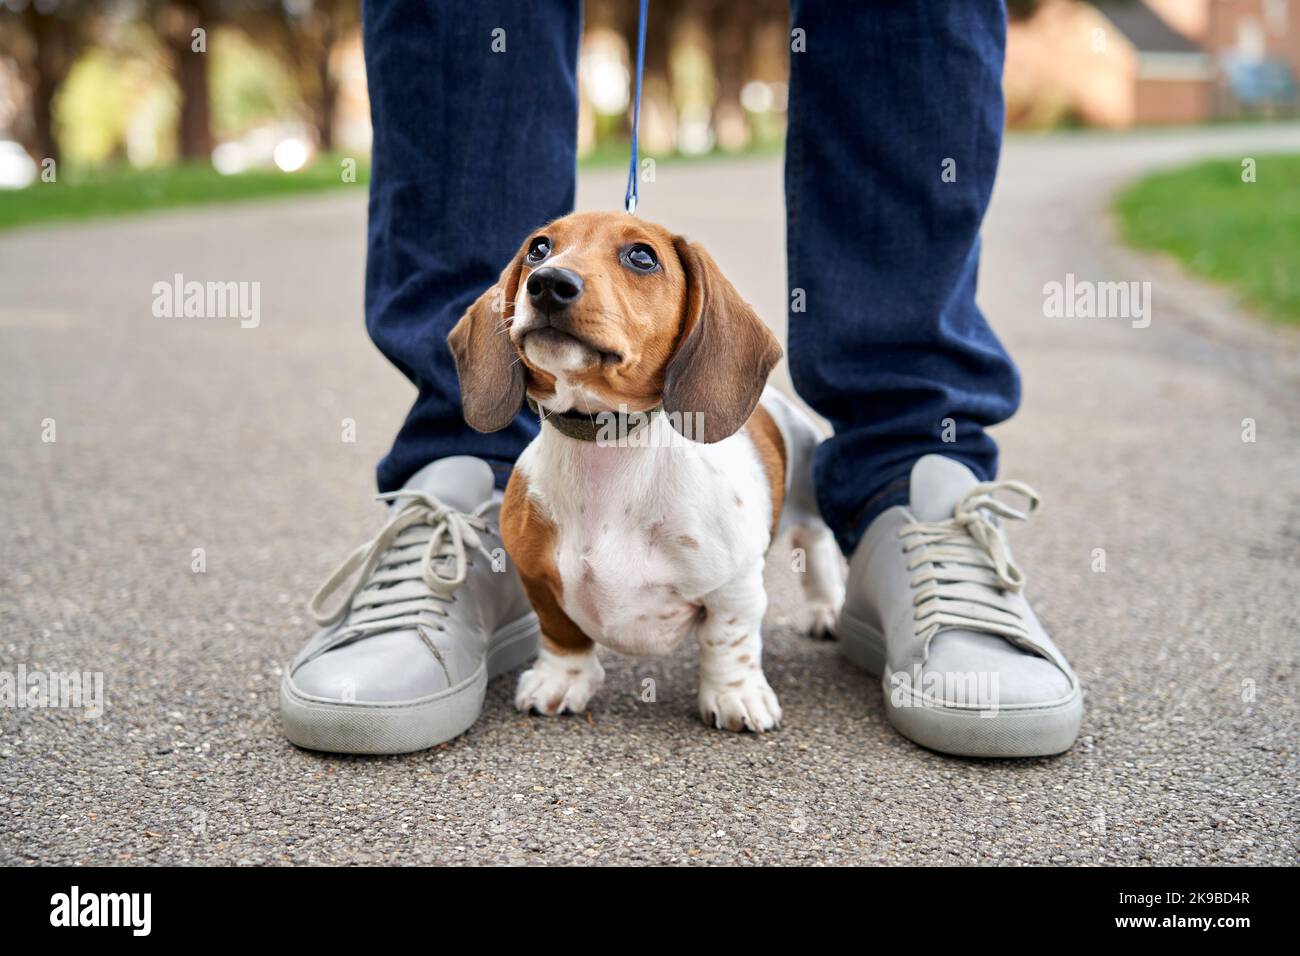 Miniature Dachshund puppy standing between owners legs while on a walk Stock Photo